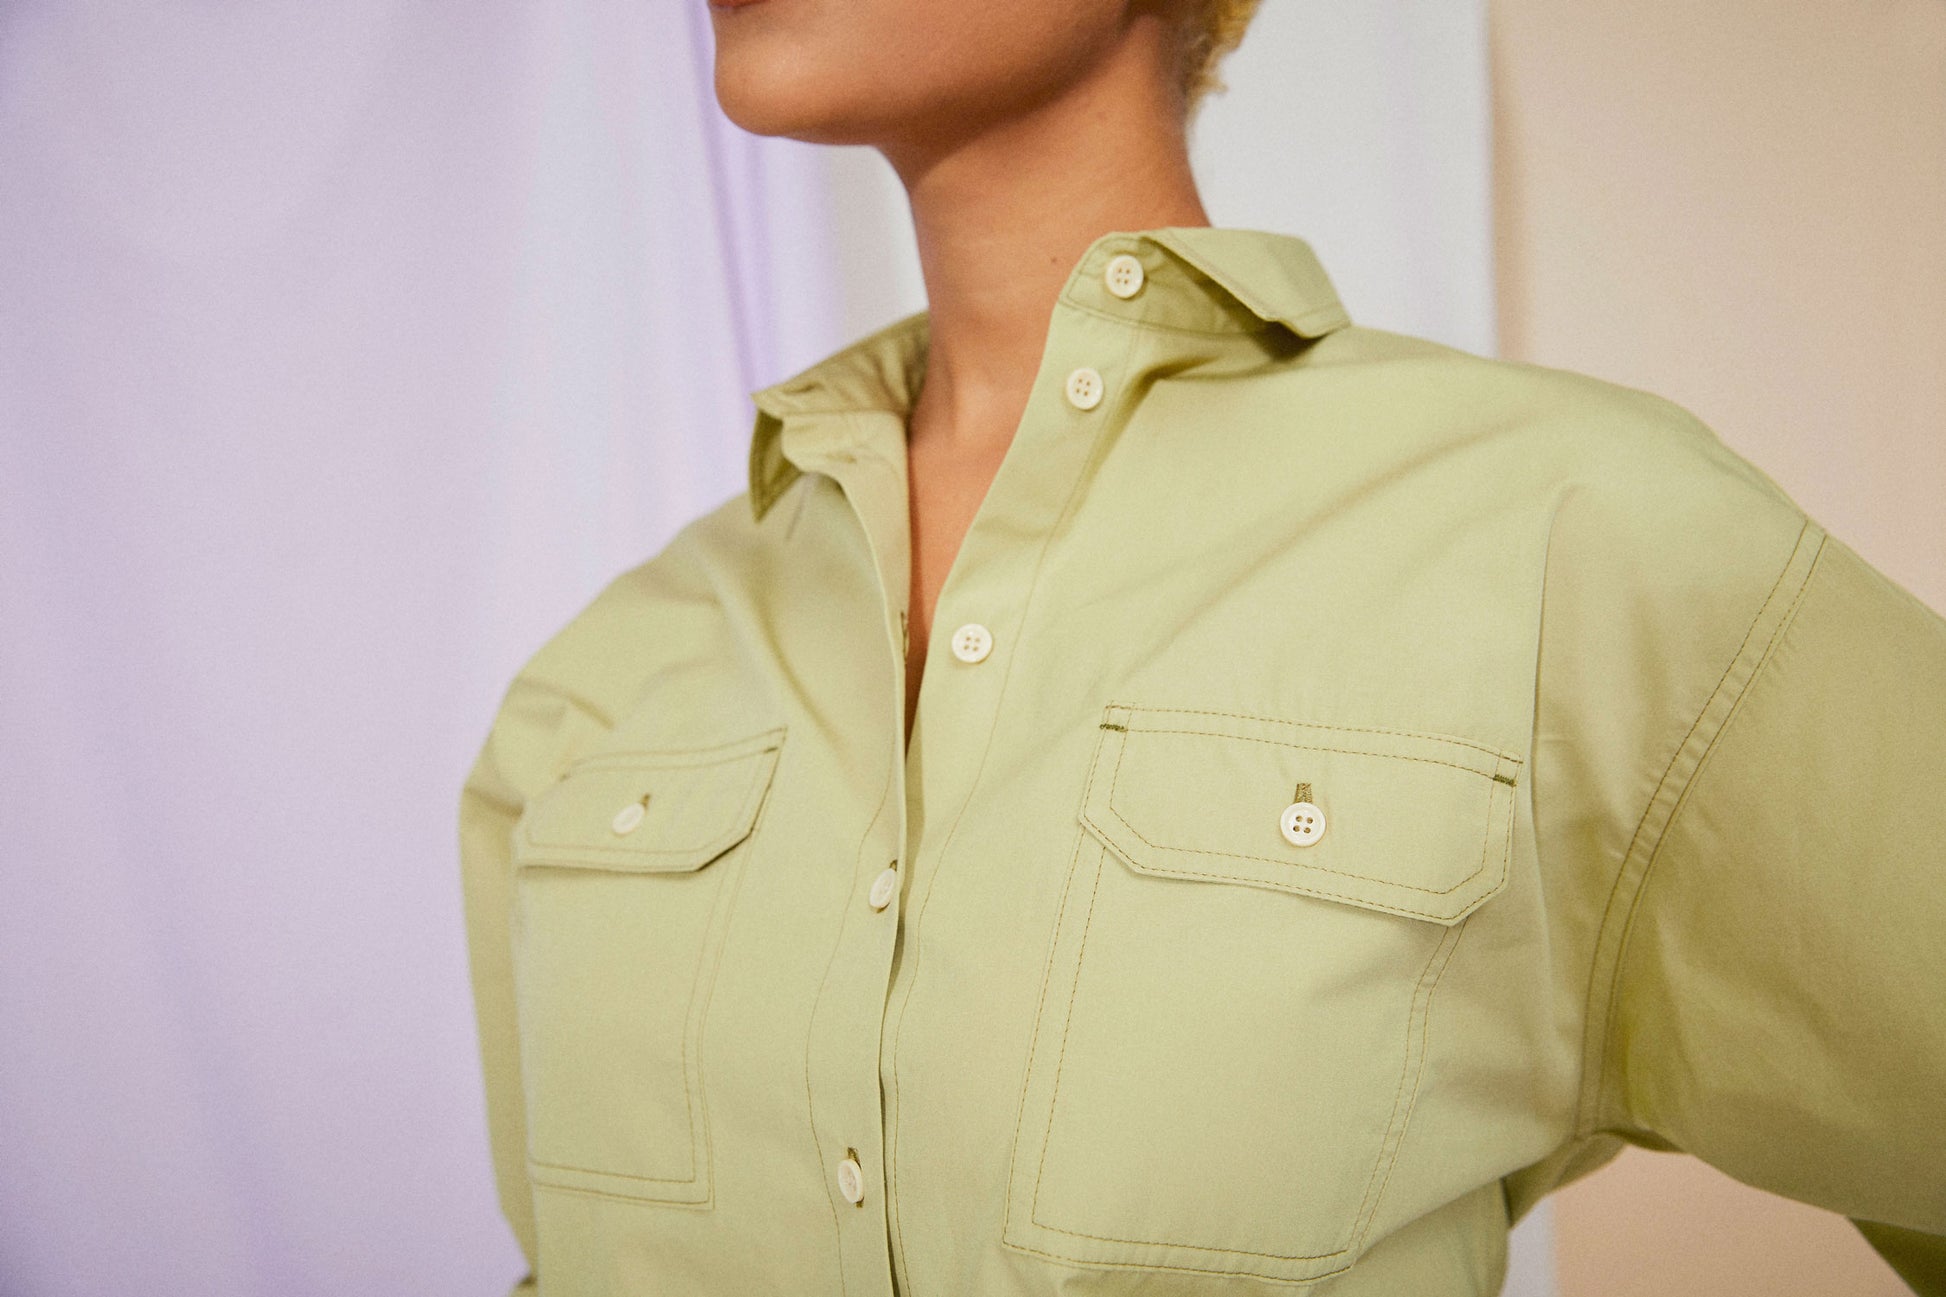 Womens Oversized Shirt in khaki olive, with detachable tie belt and safari styling details. Belted cuffs for sleeve details and utility patch pockets. Zadie Boyfriend Shirt by Saywood. Close up of utility patch pockets.